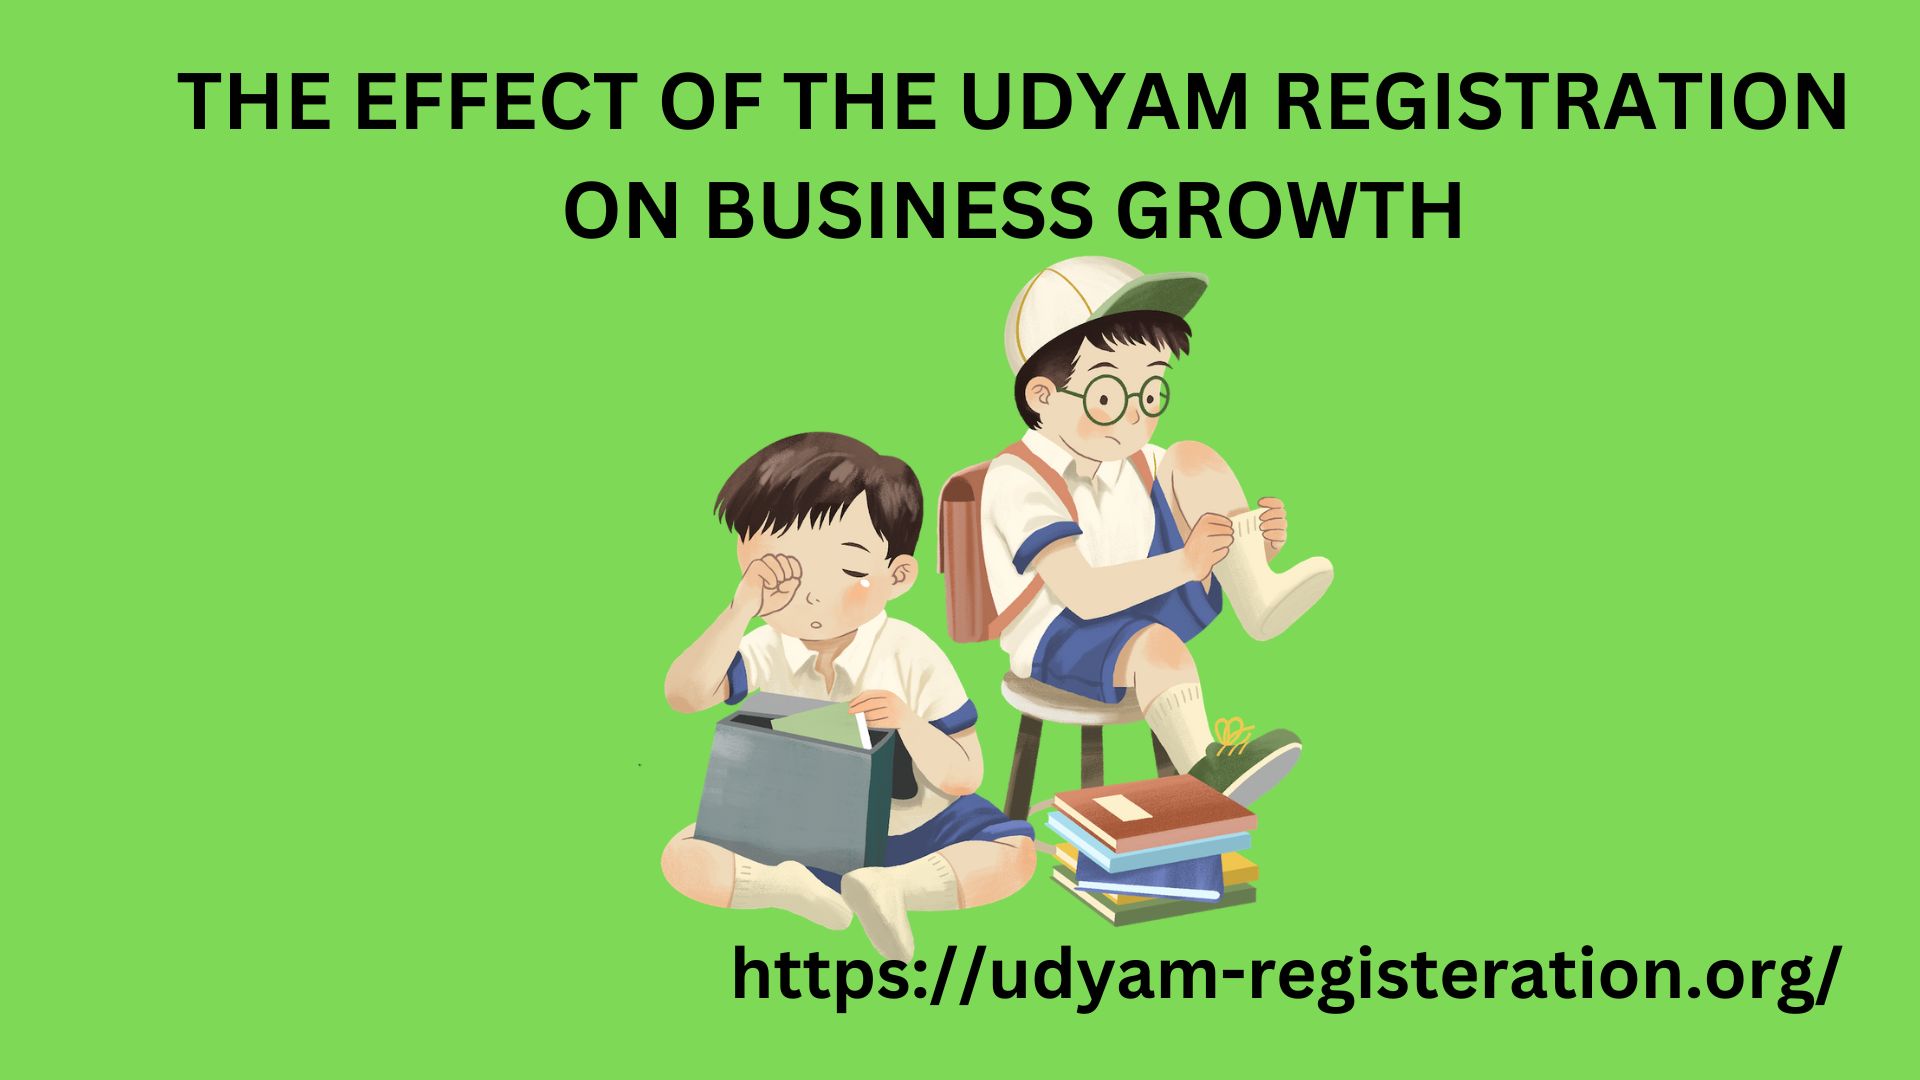 The Effect of the Udyam registration on Business Growth